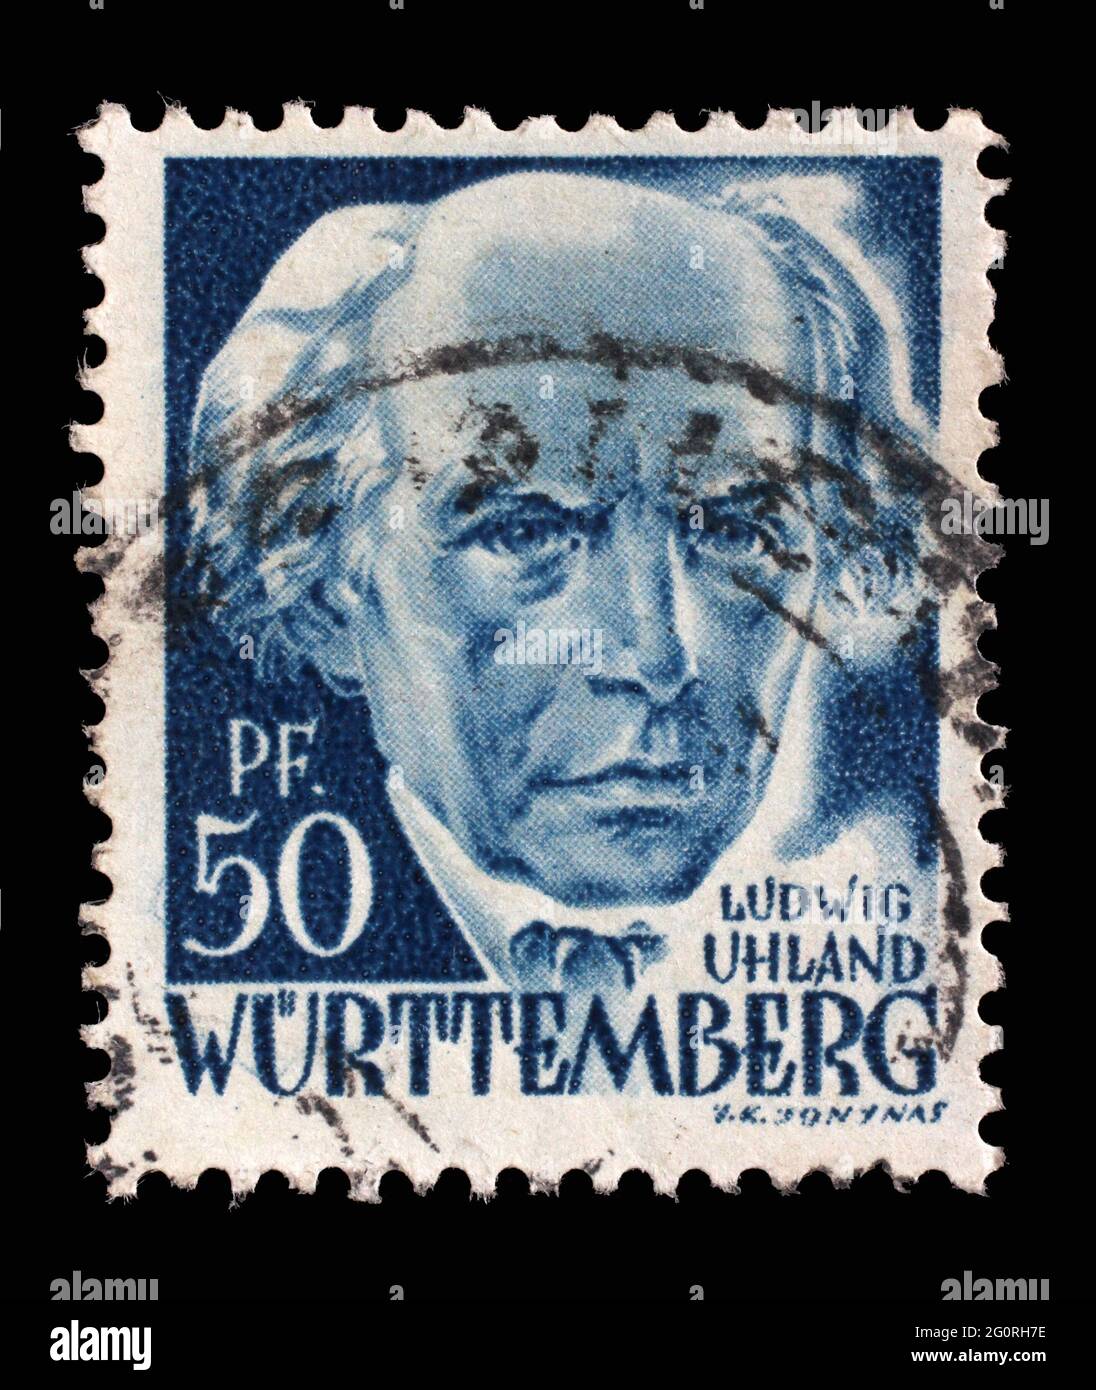 Stamp printed in Germany, French Occupation of Wurttemberg shows Ludwig Uhland, poet, philologist and literary historian, circa 1948 Stock Photo